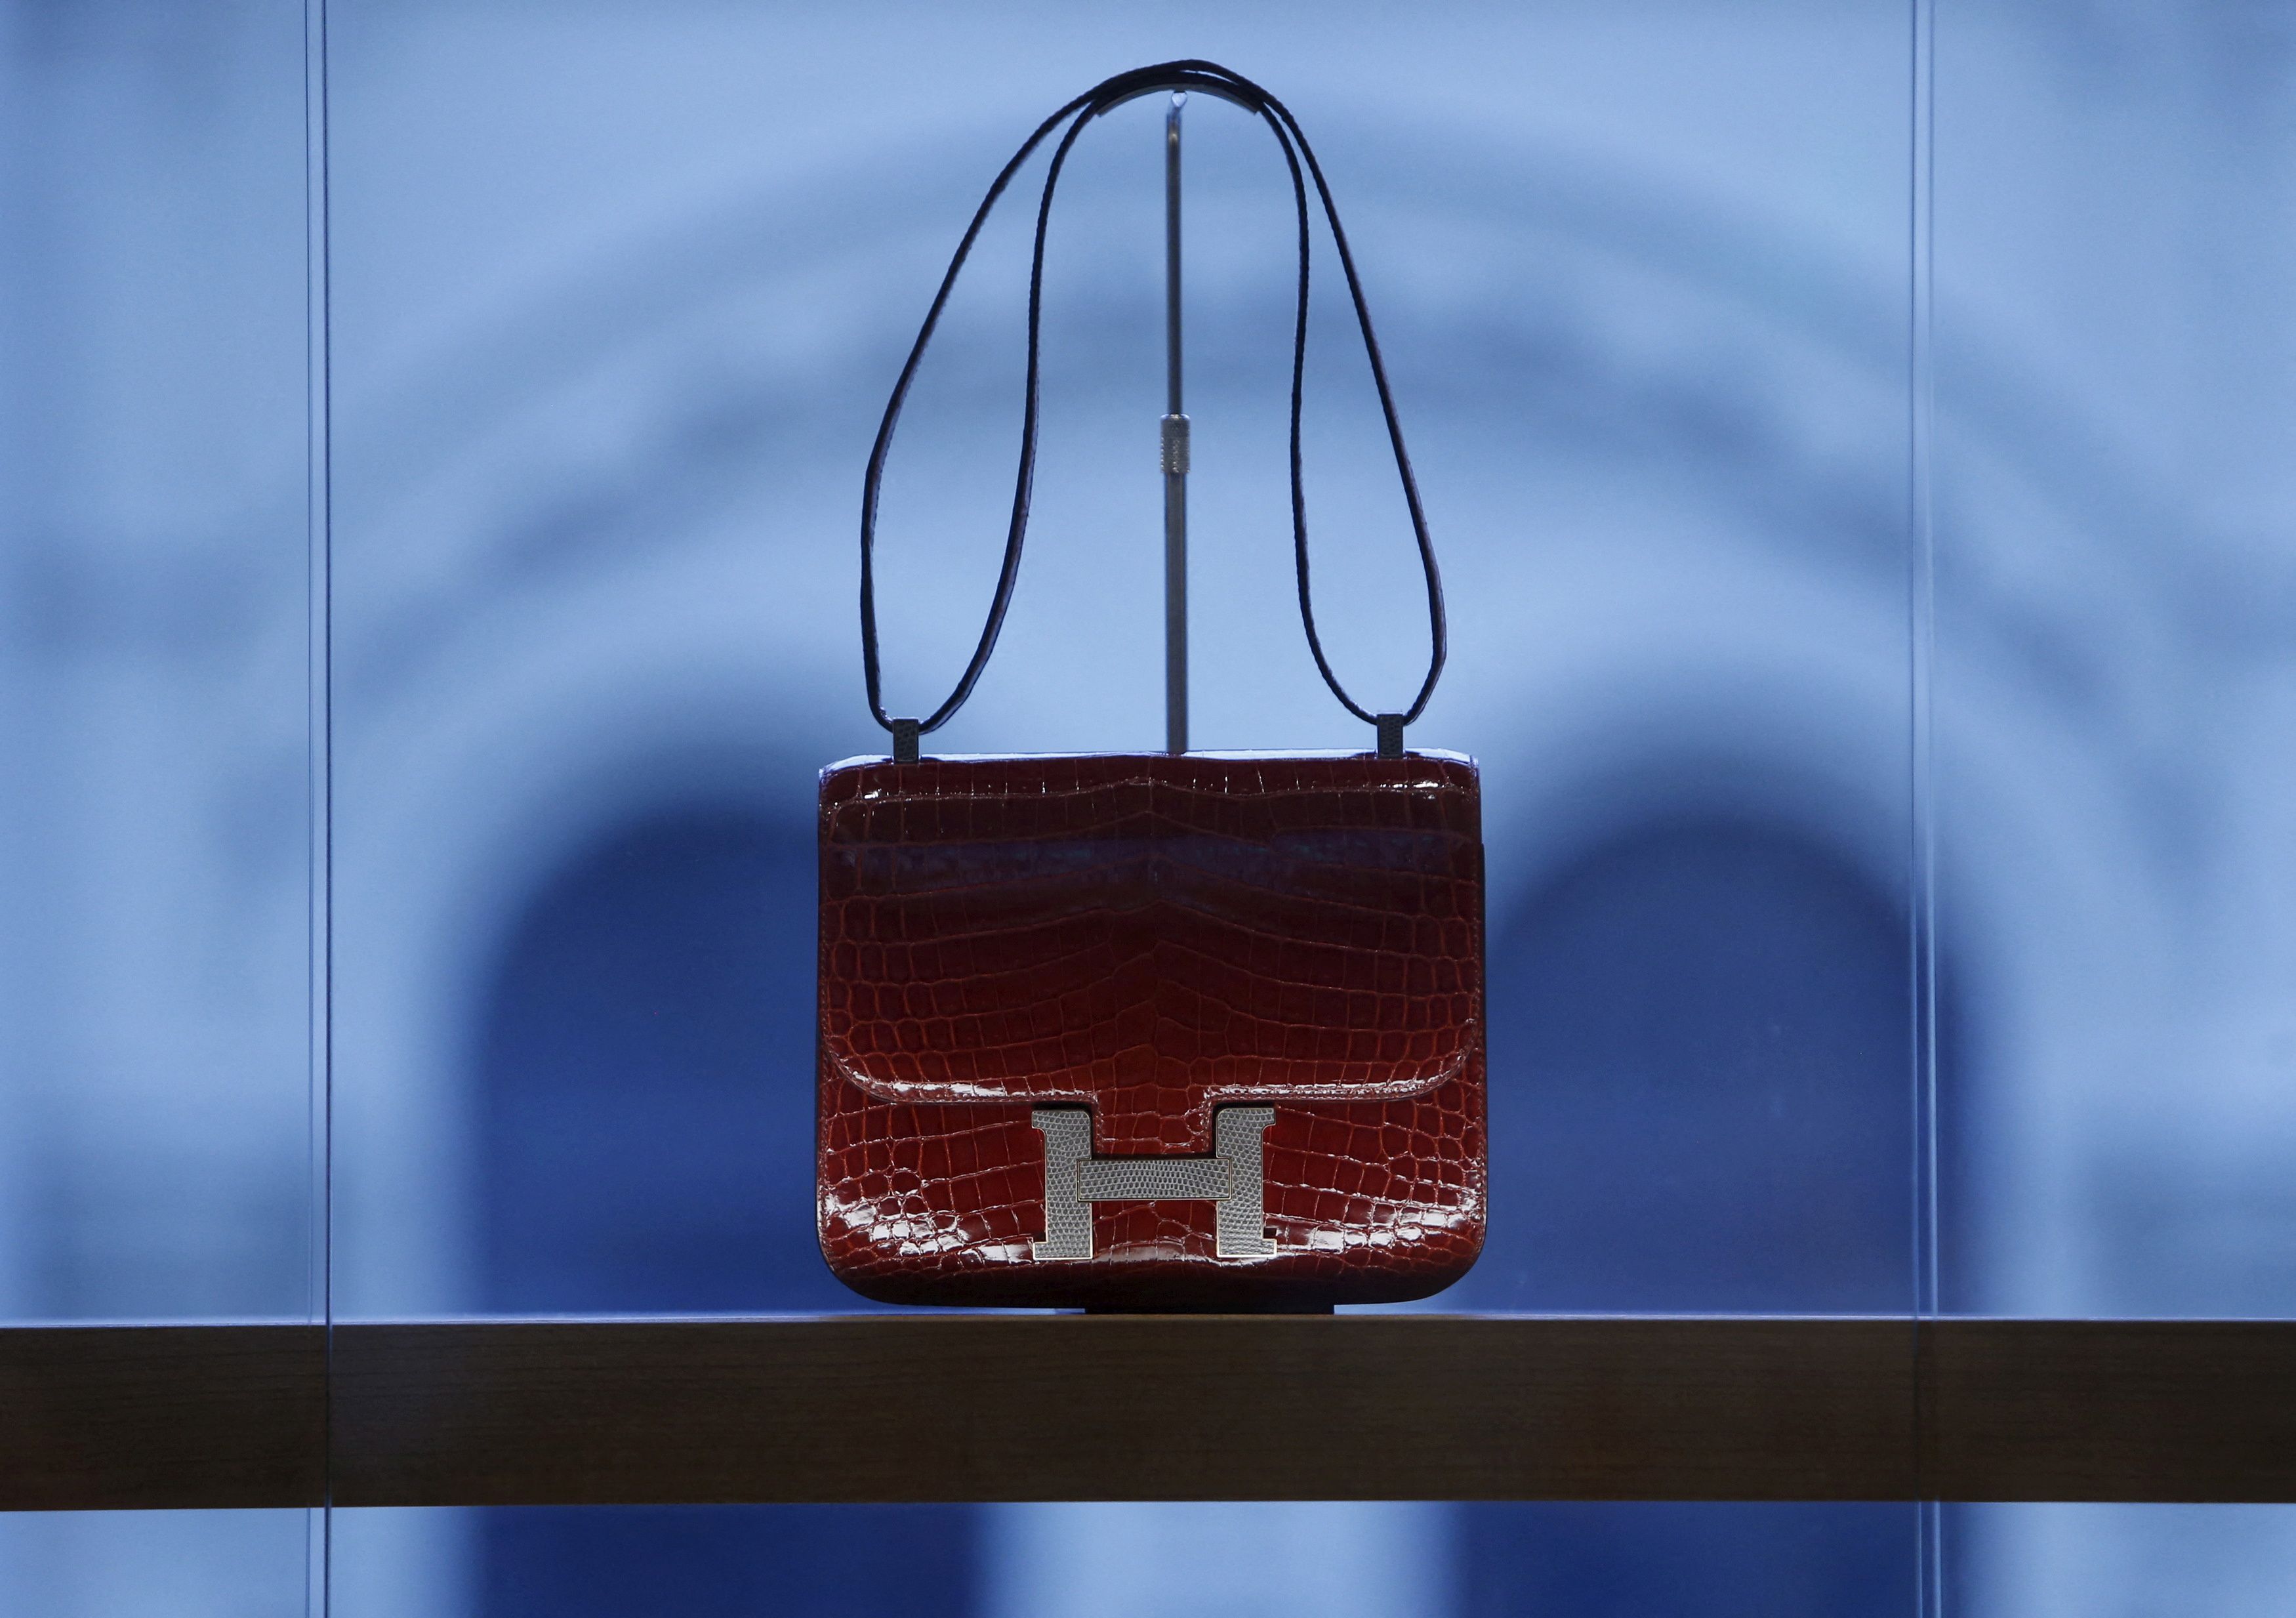 A handbag is on display at Hermes shop during a press preview in Russia's landmark GUM shopping centre on the Red Square in Moscow